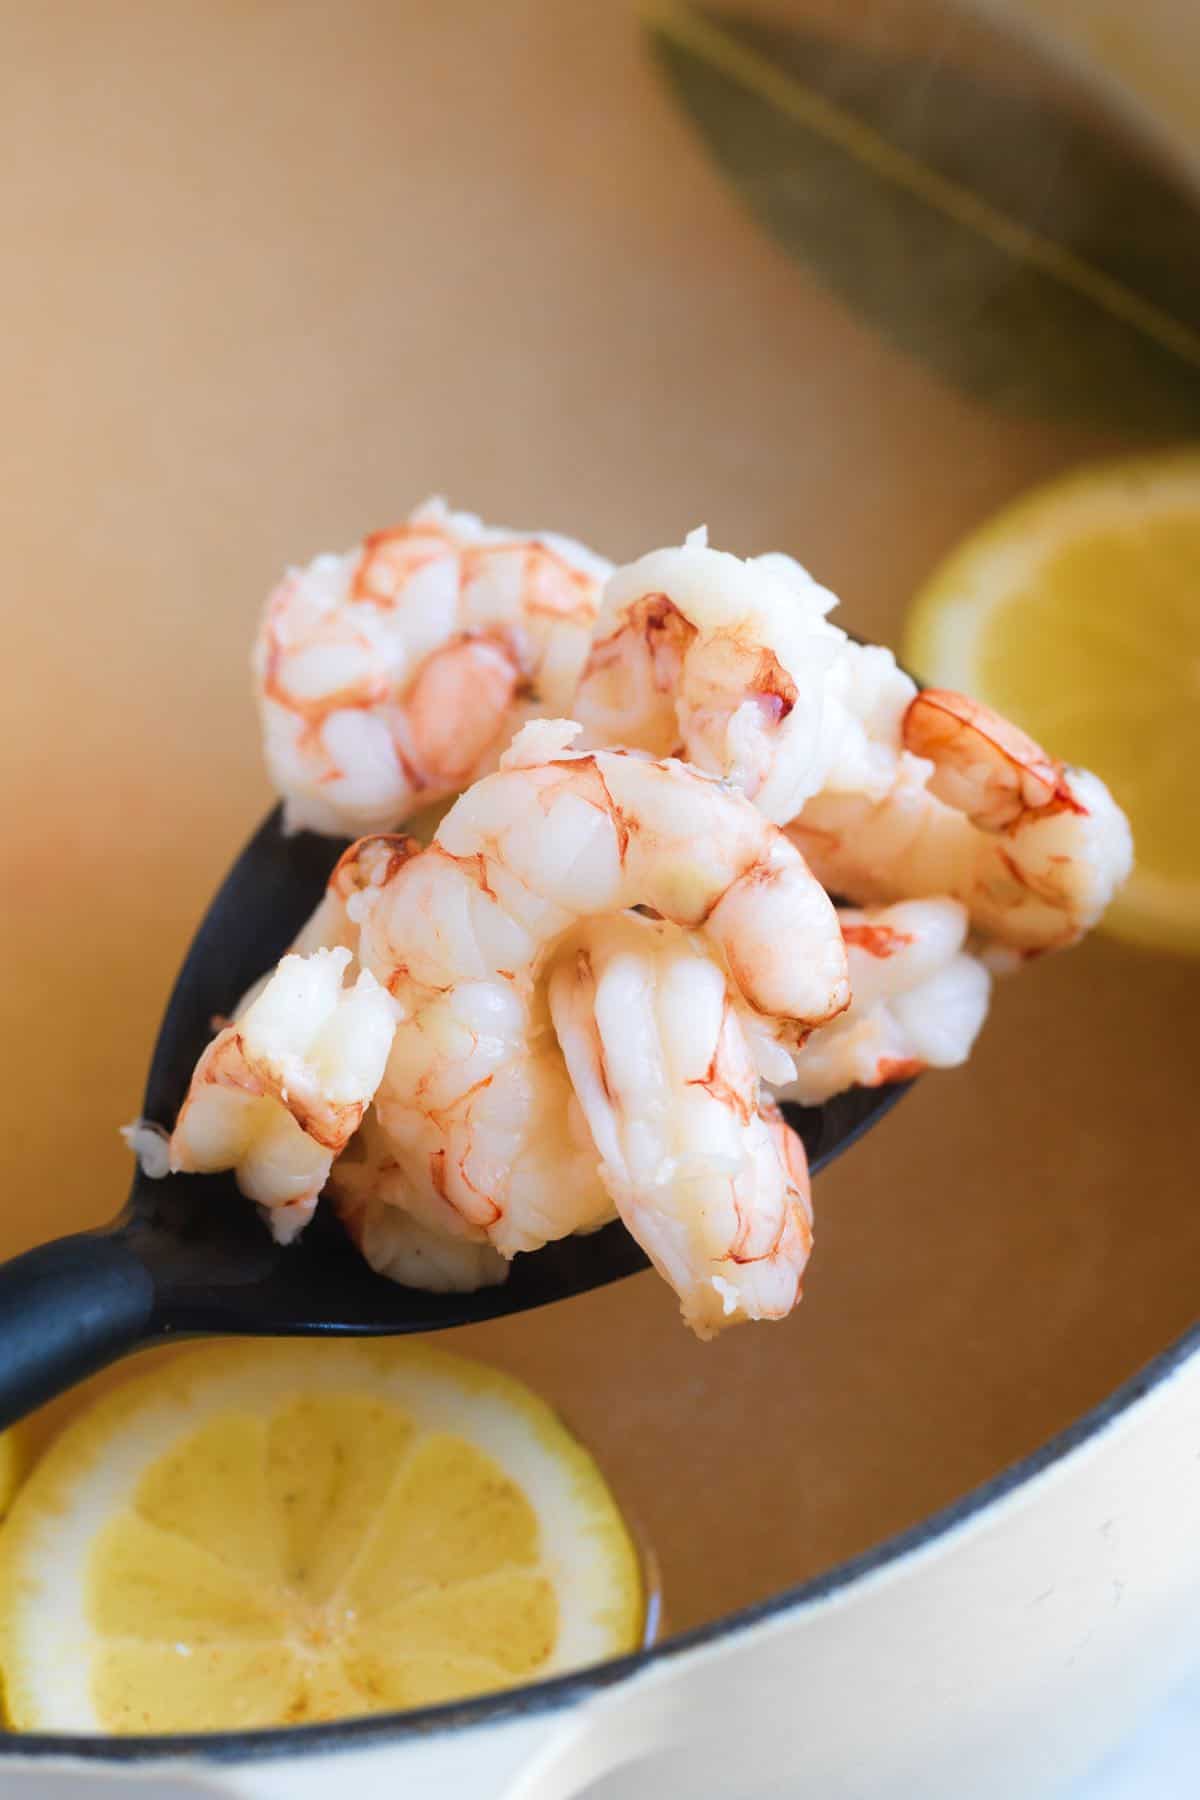 Poached shrimp coming out of the poaching liquid